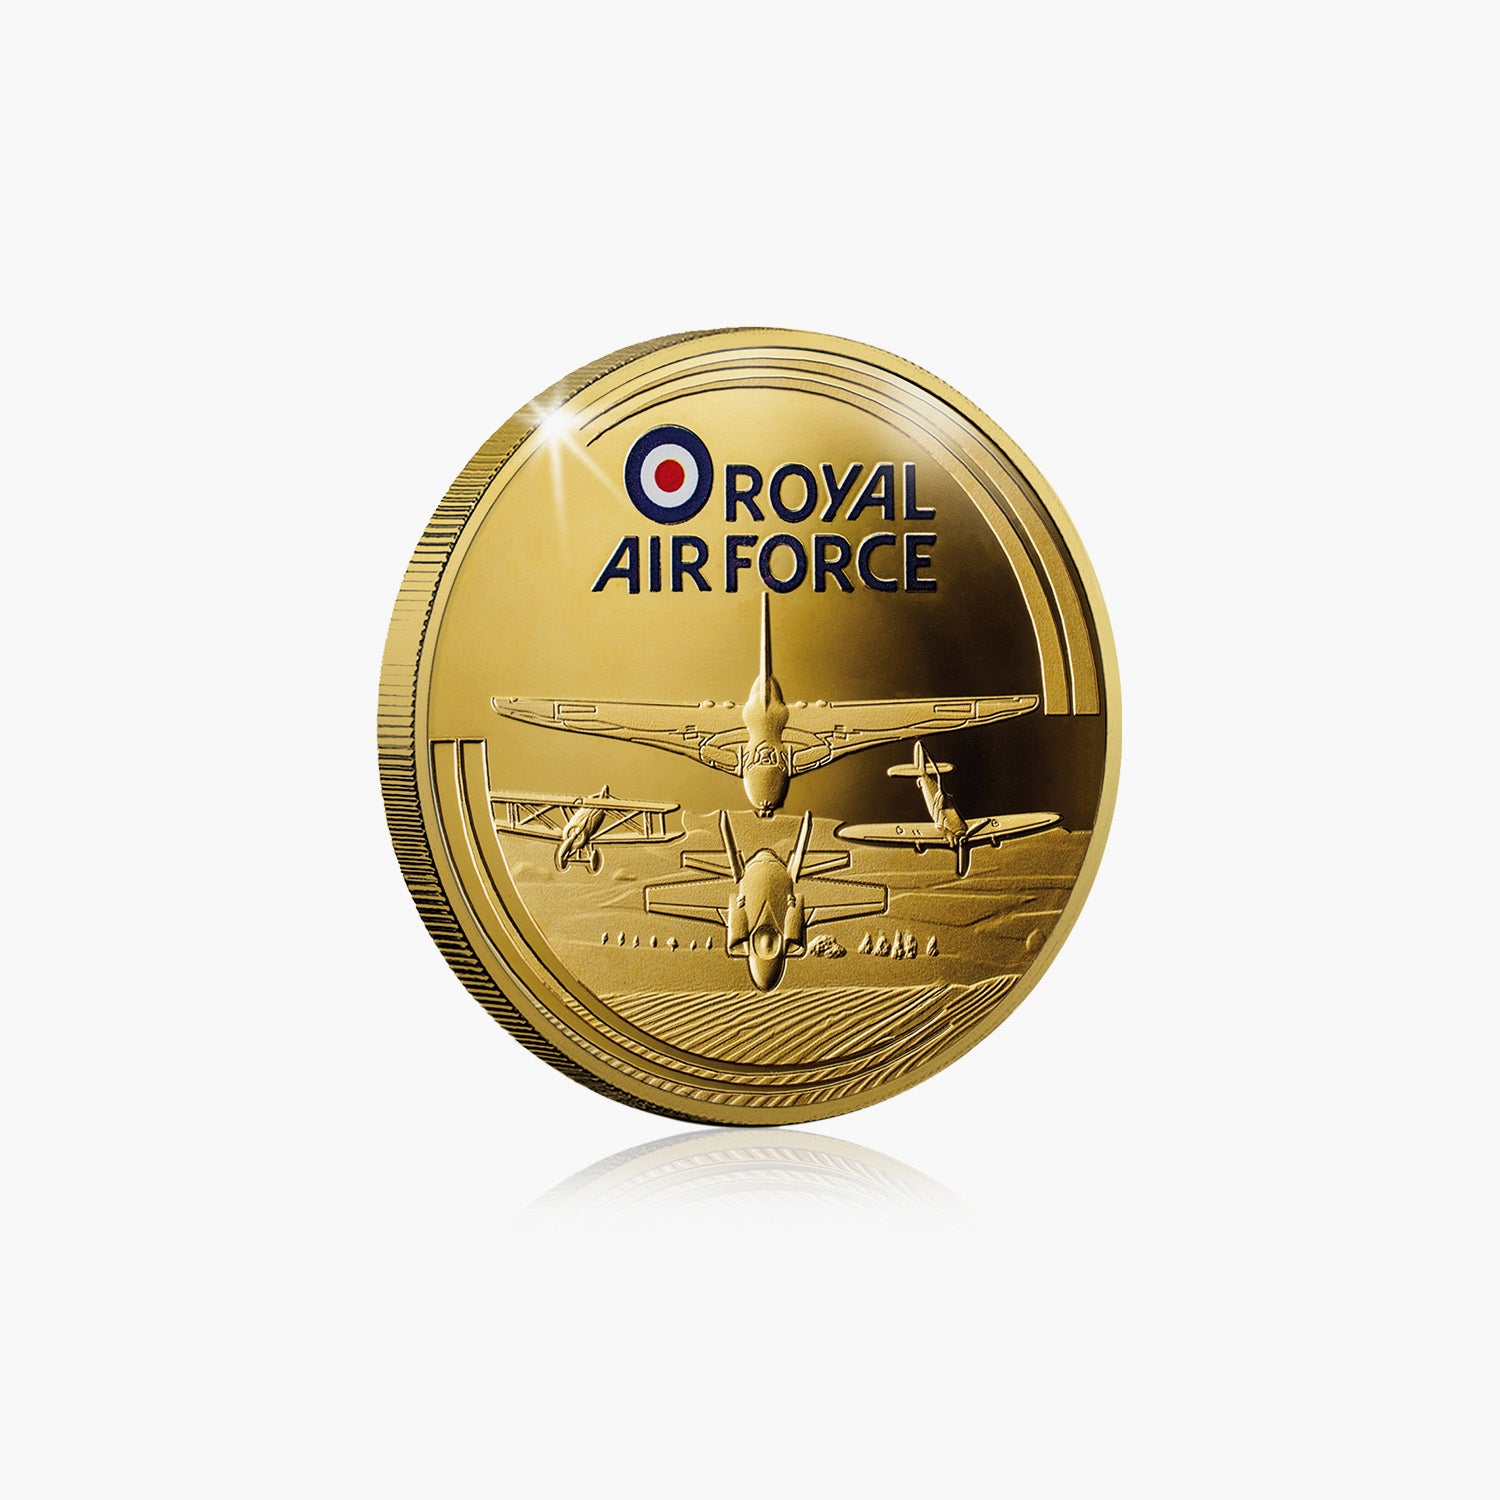 Camm's First Gold-Plated Commemorative